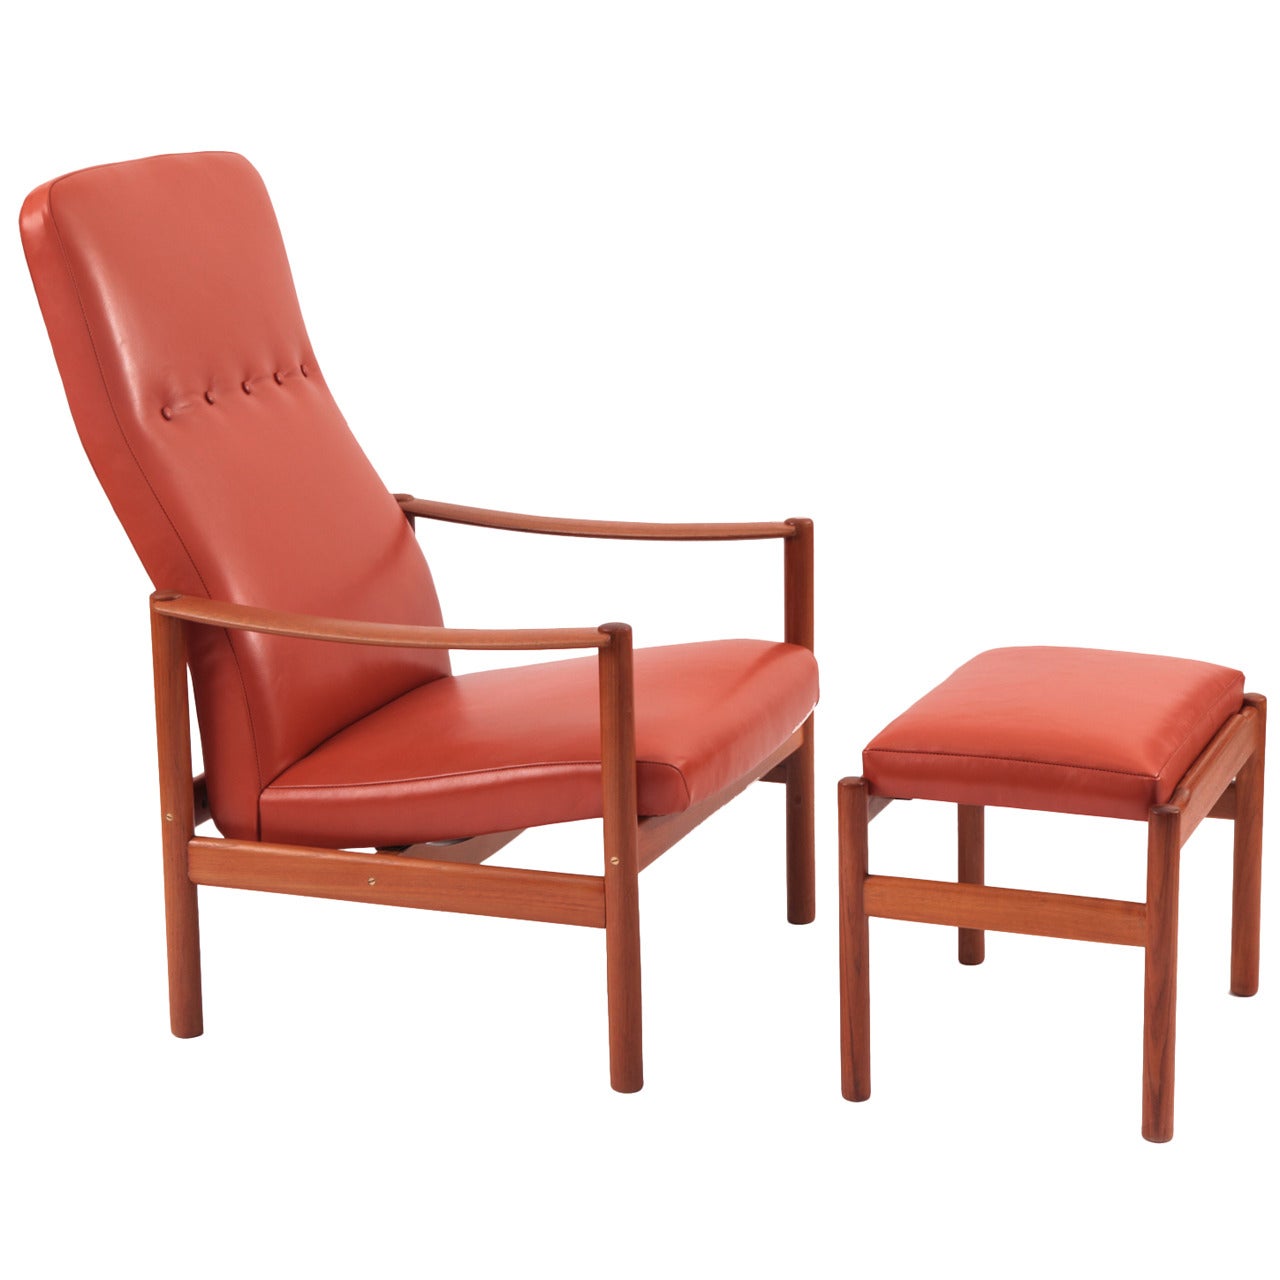 Teak and Leather Lounge Chair and Ottoman